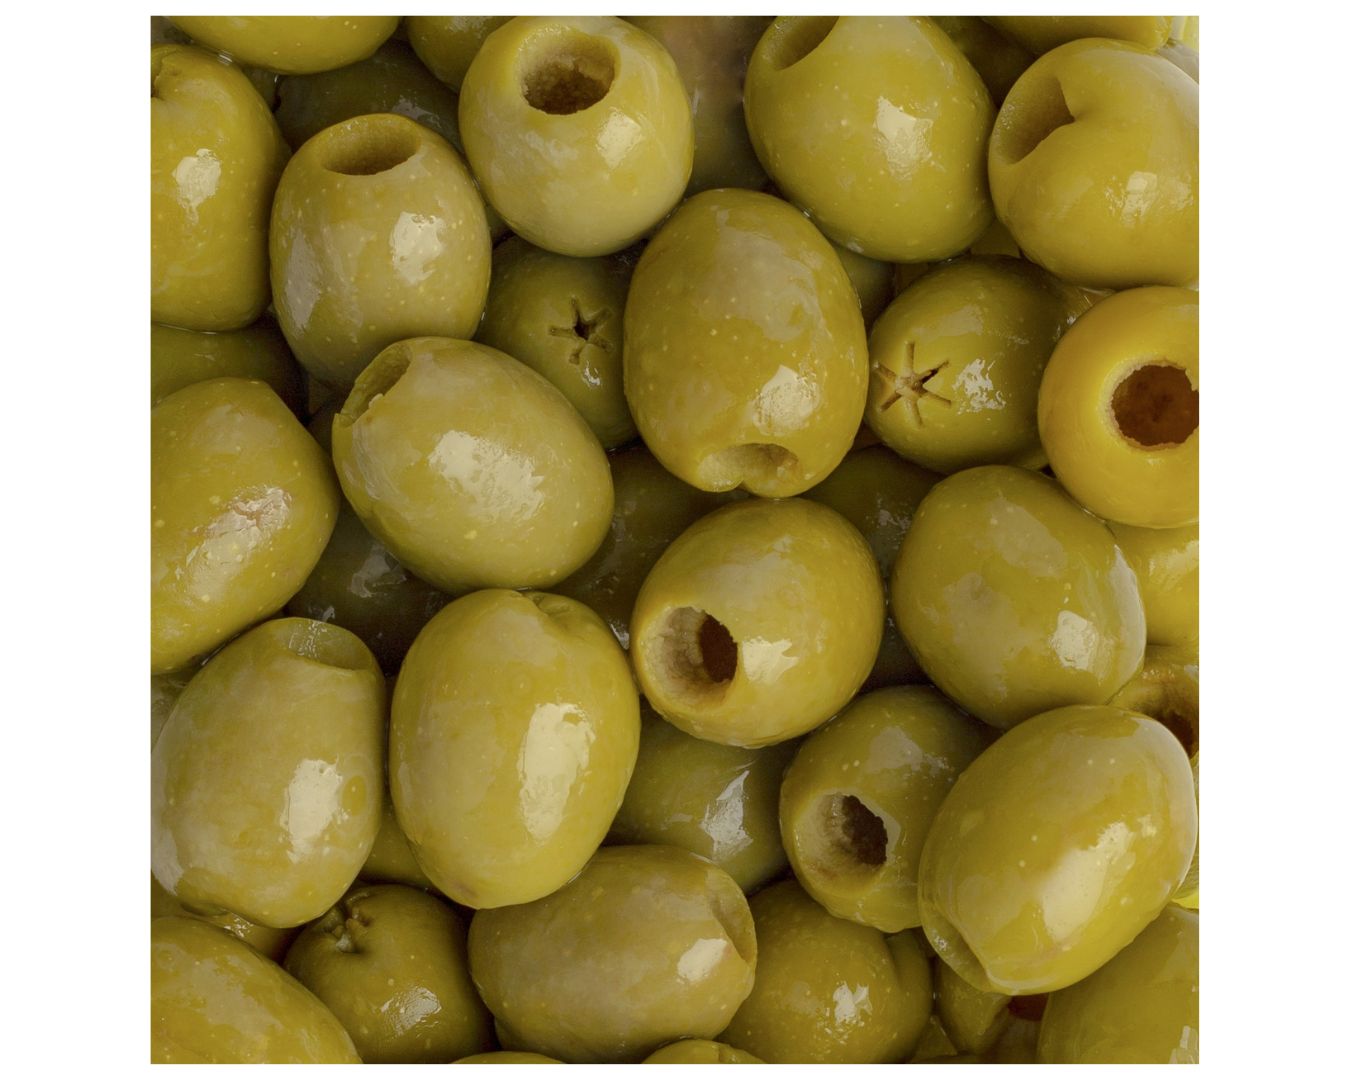 Perello Gordal Picante Olives available at The Local Basket